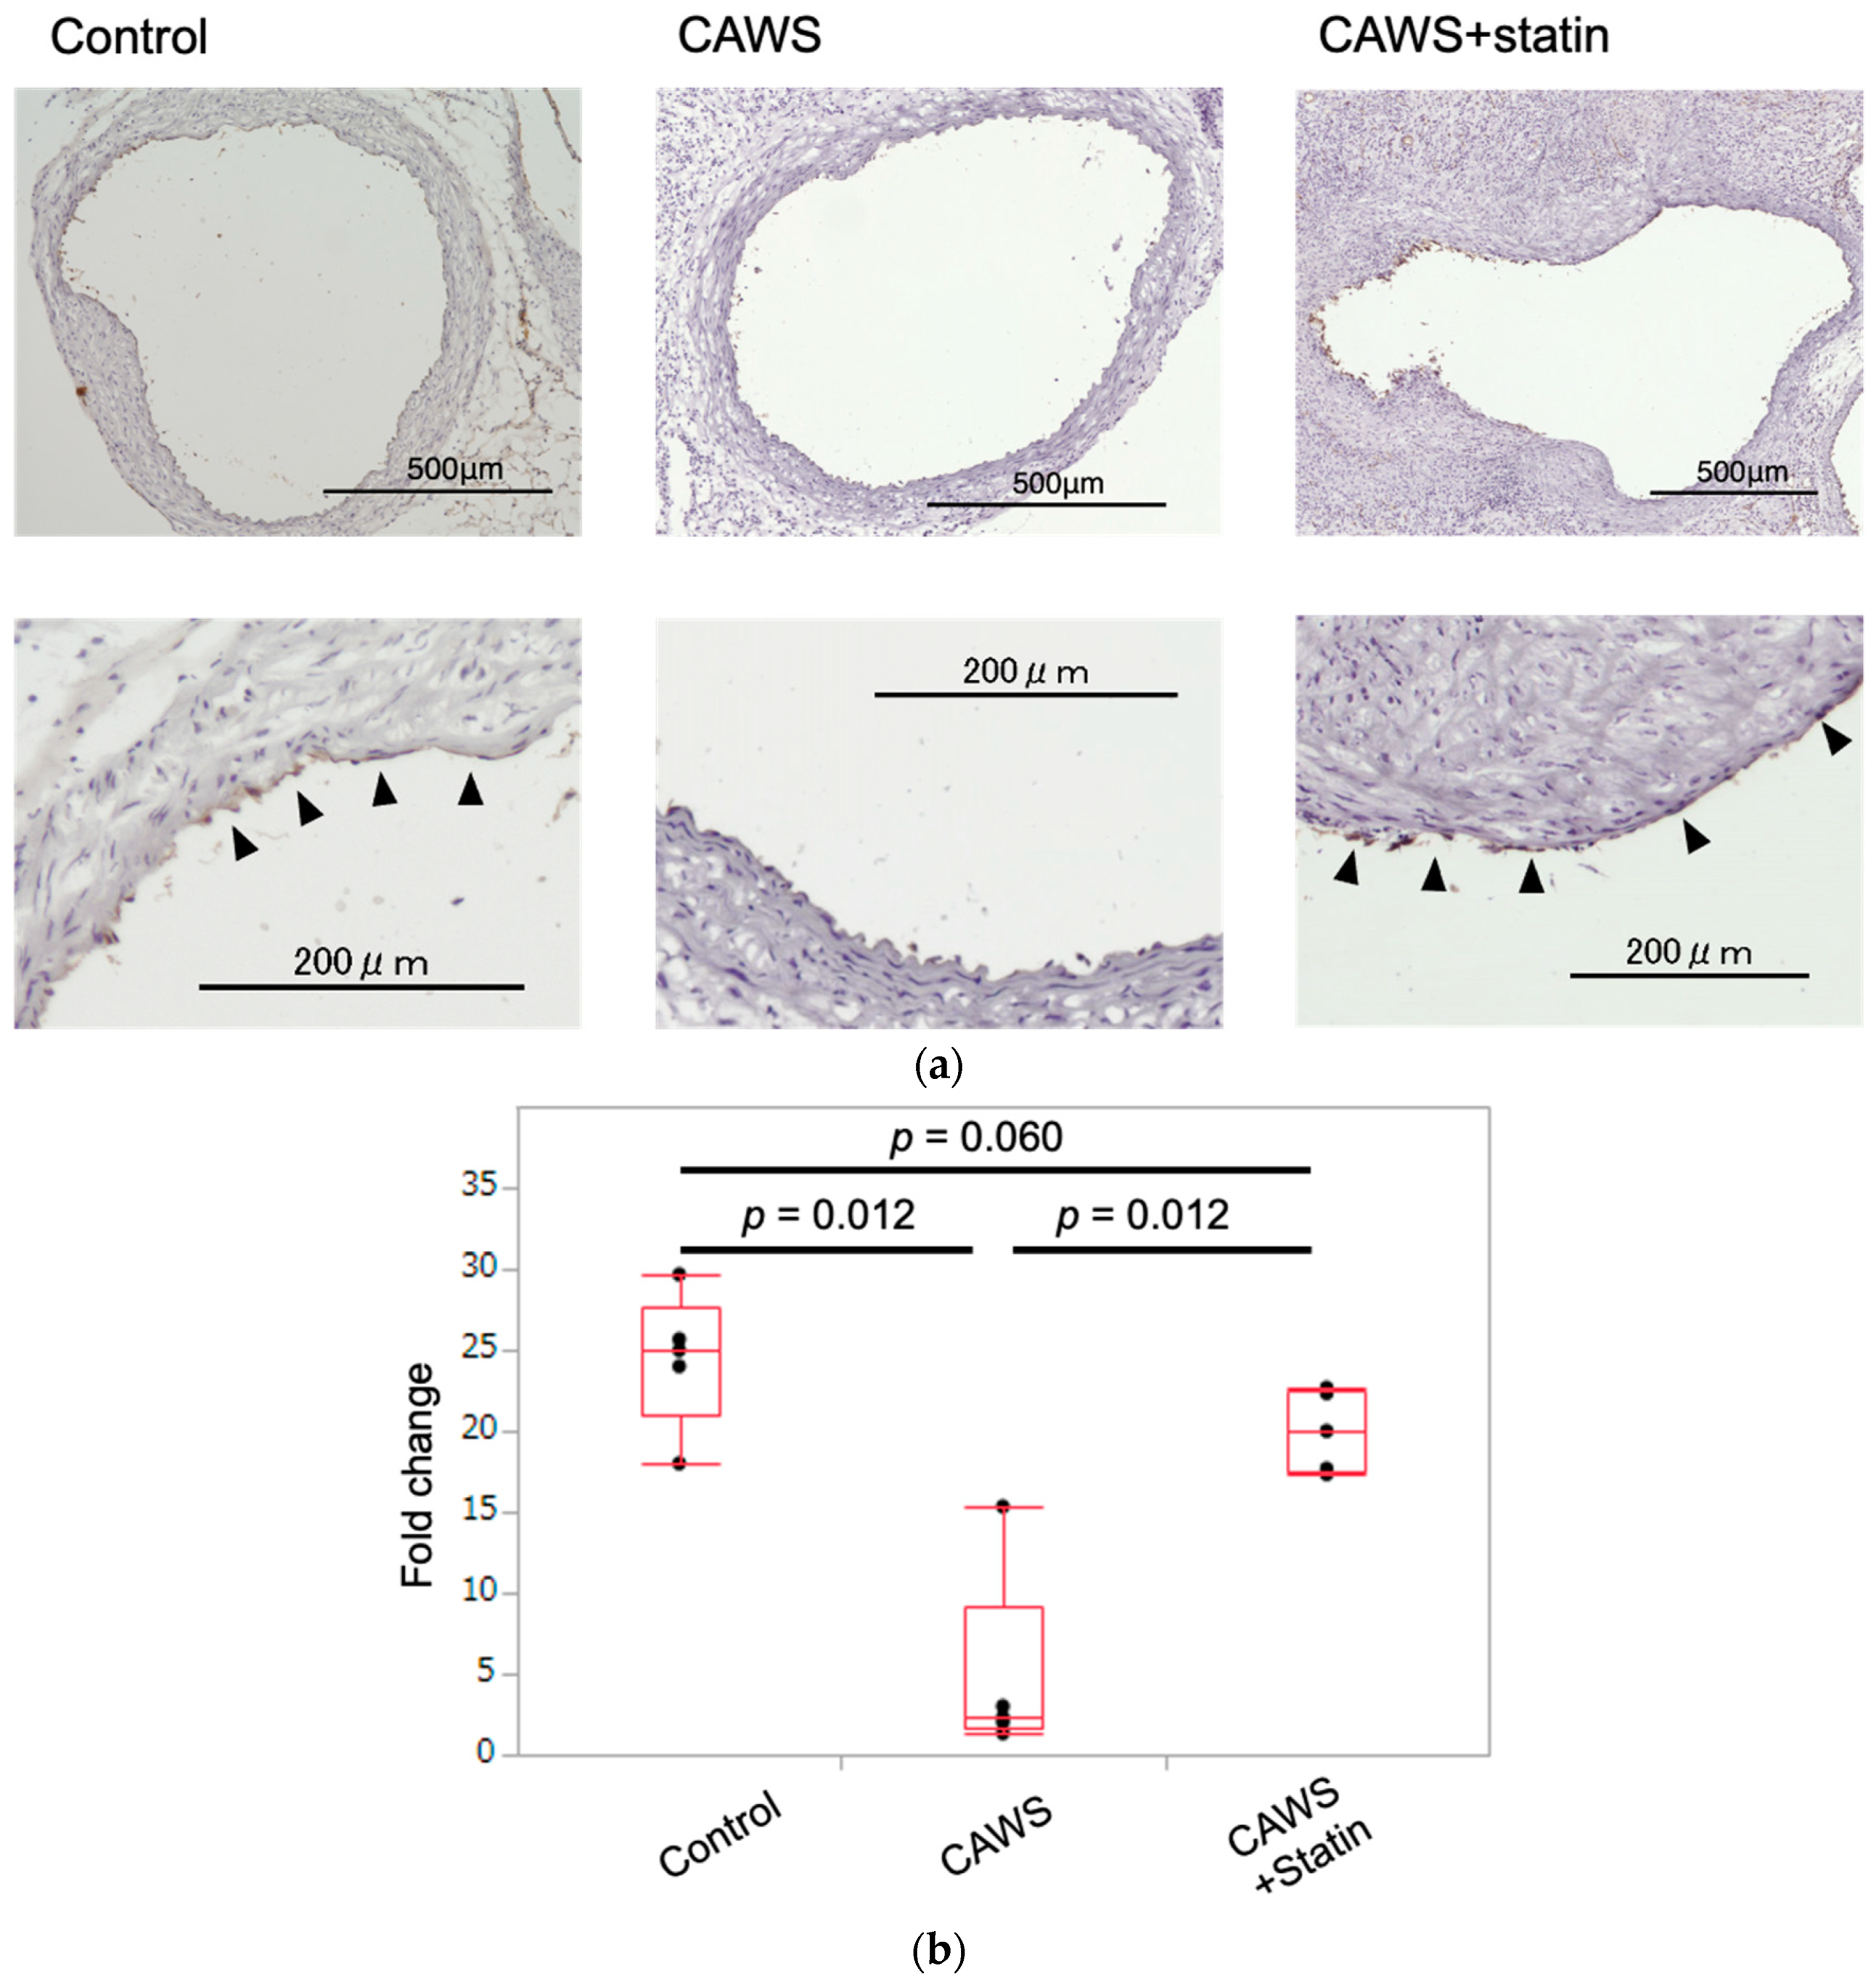 IJMS Free Full-Text Statins Show Anti-Atherosclerotic Effects by Improving Endothelial Cell Function in a Kawasaki Disease-like Vasculitis Mouse Model pic